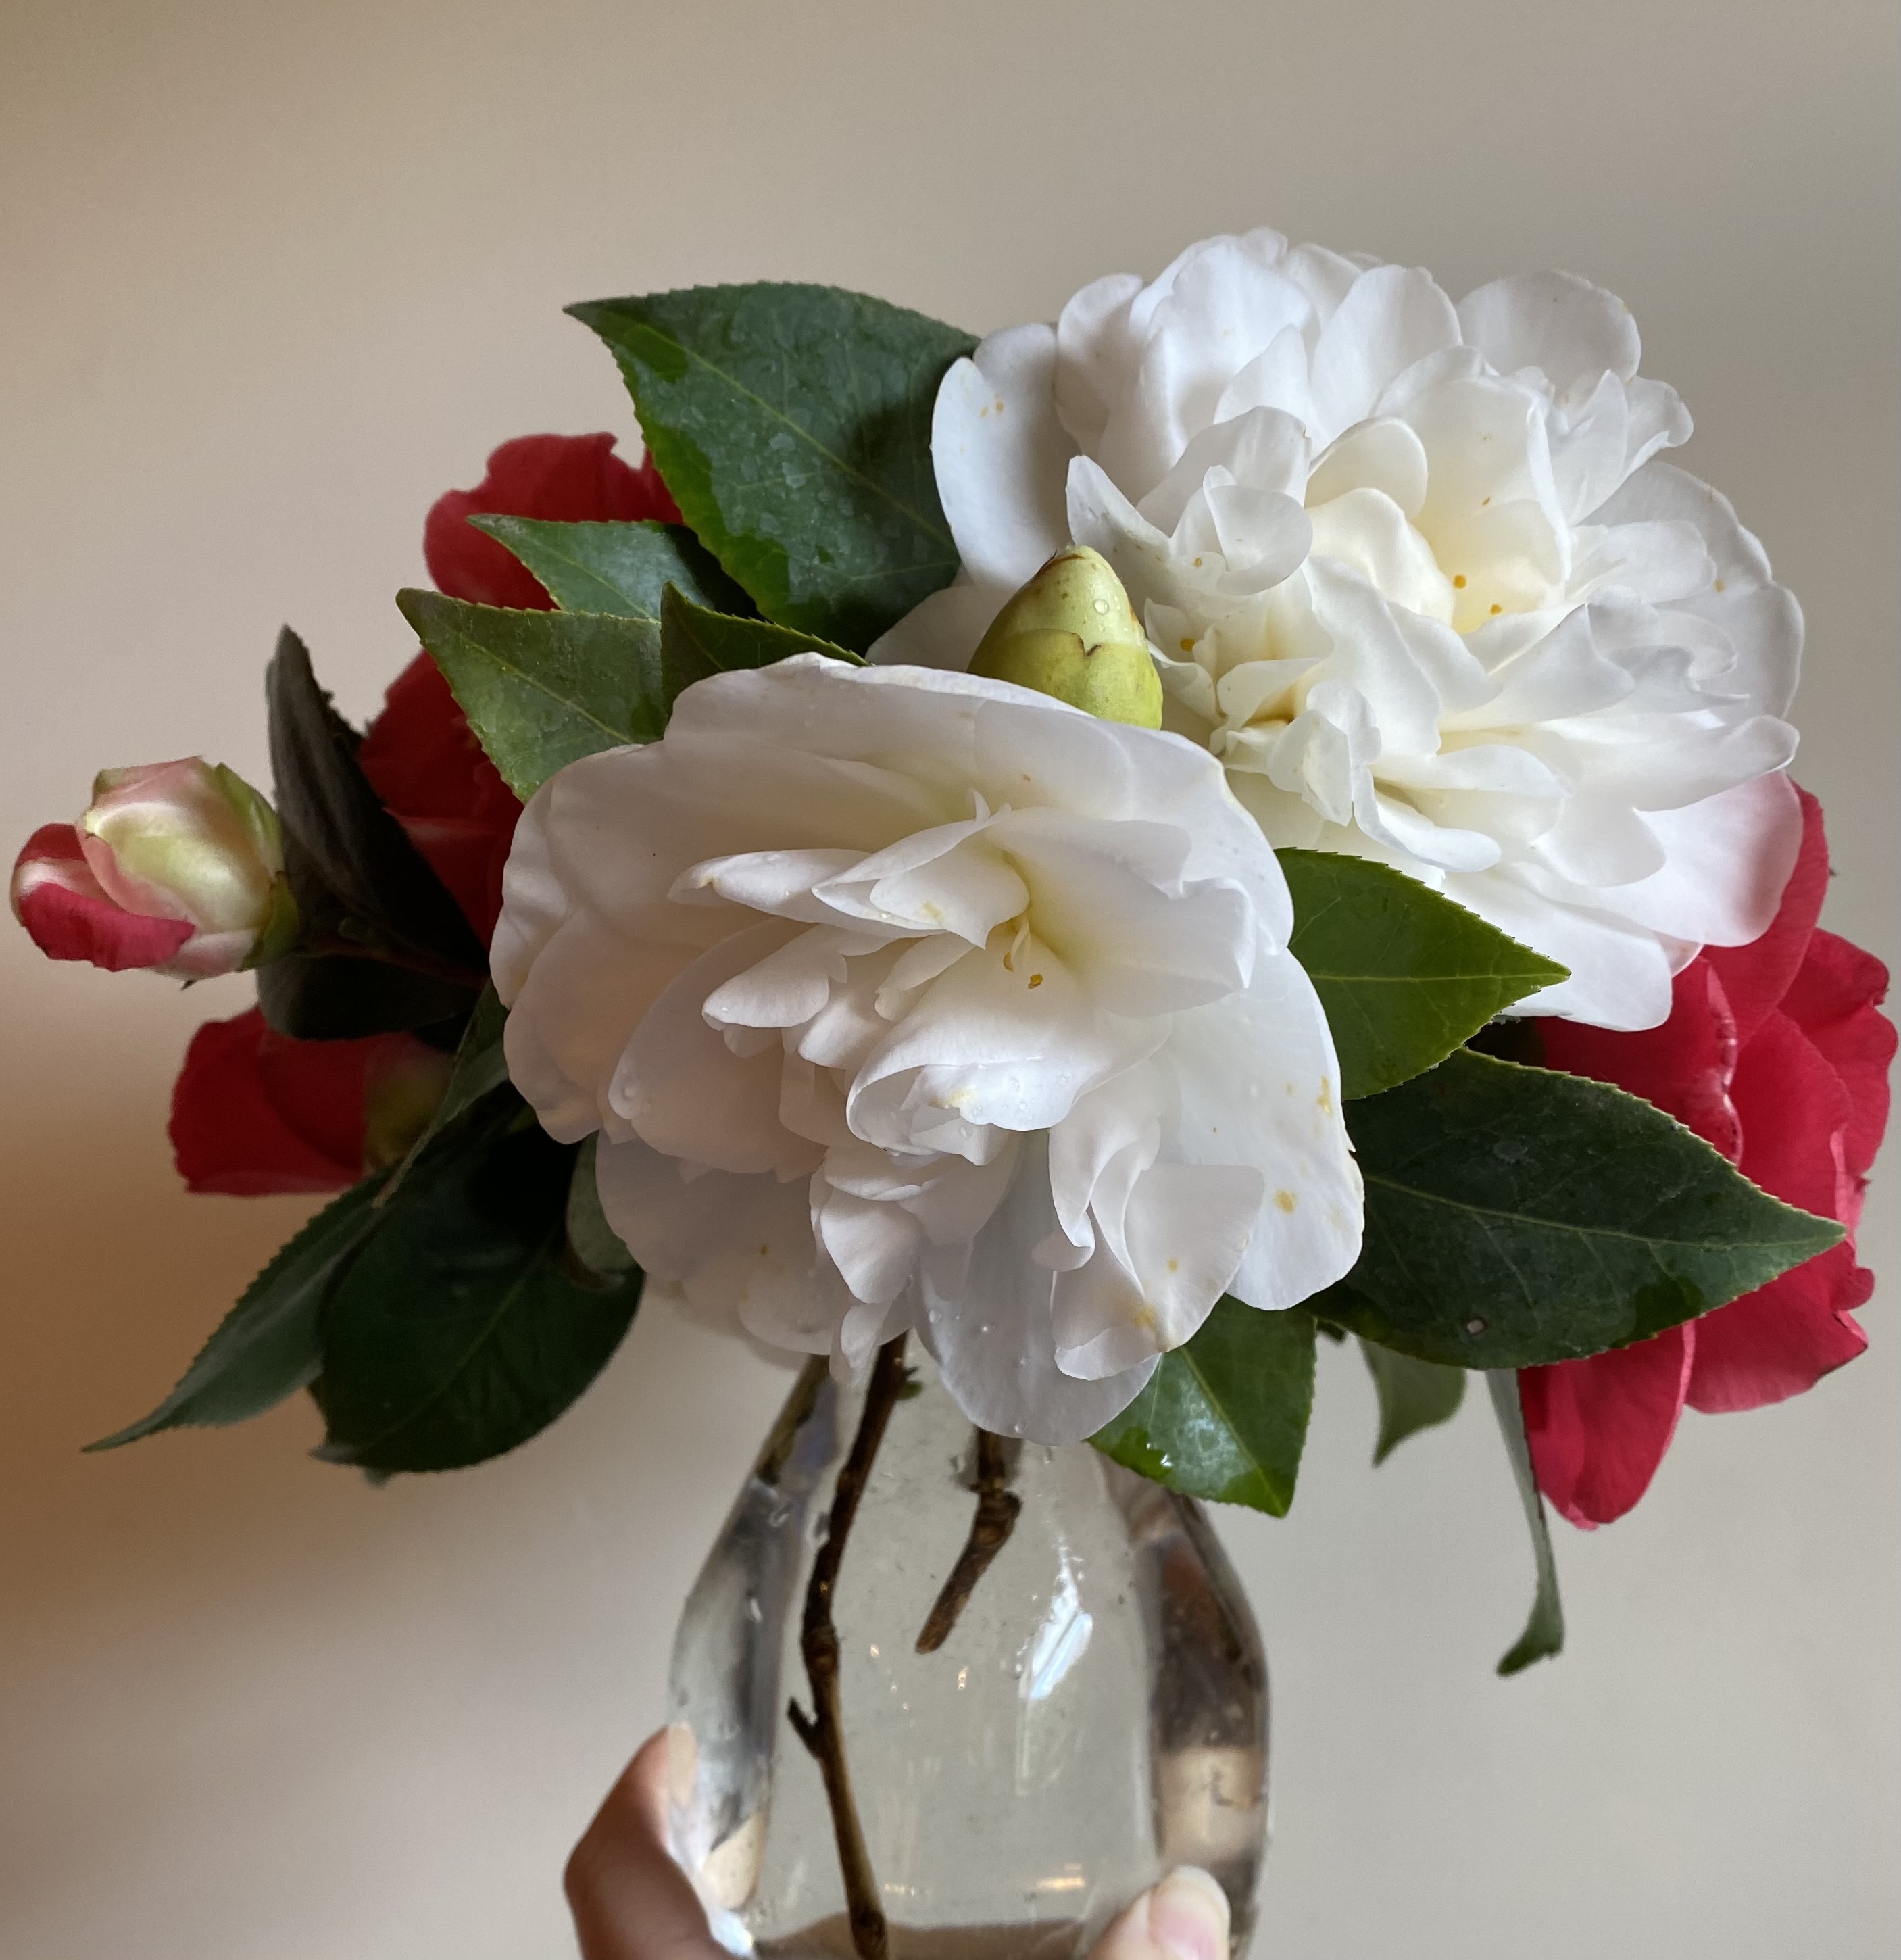 A glass vase holds red and white camellias.